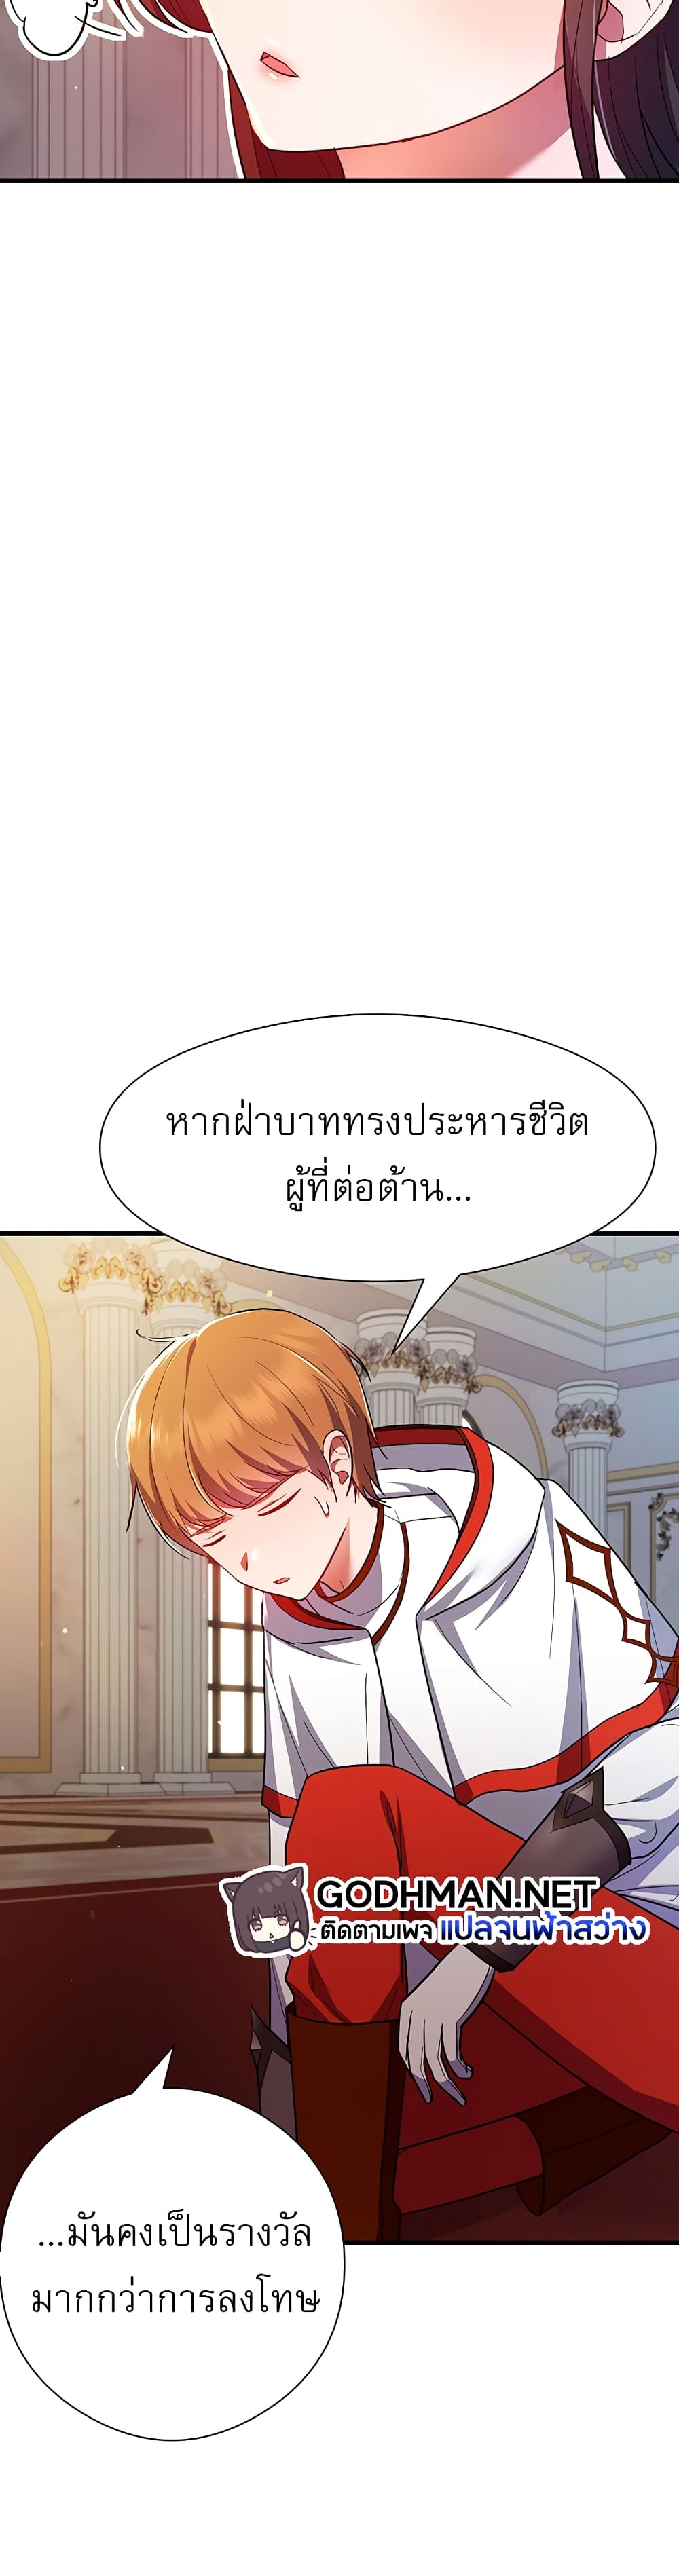 Taming an Evil Young Lady ตอนที่ 1 ภาพ 19